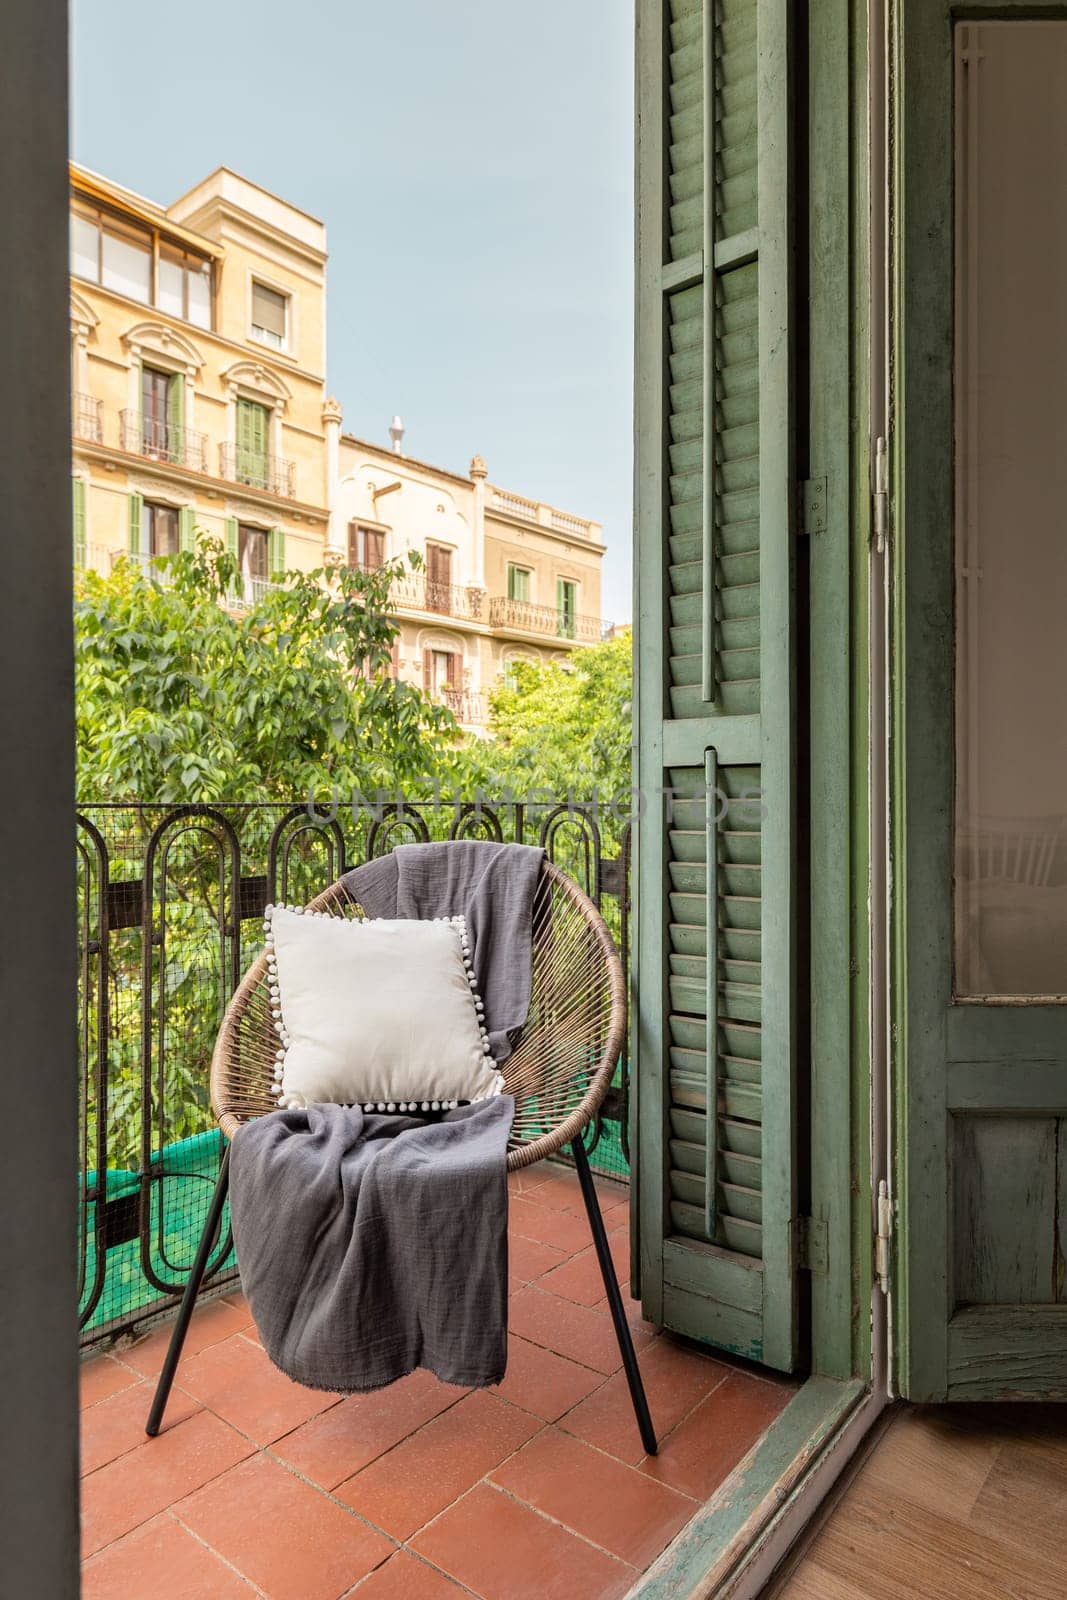 A sunny balcony with a wooden chair, traditional shutters, and trees. Cozy and inviting home.